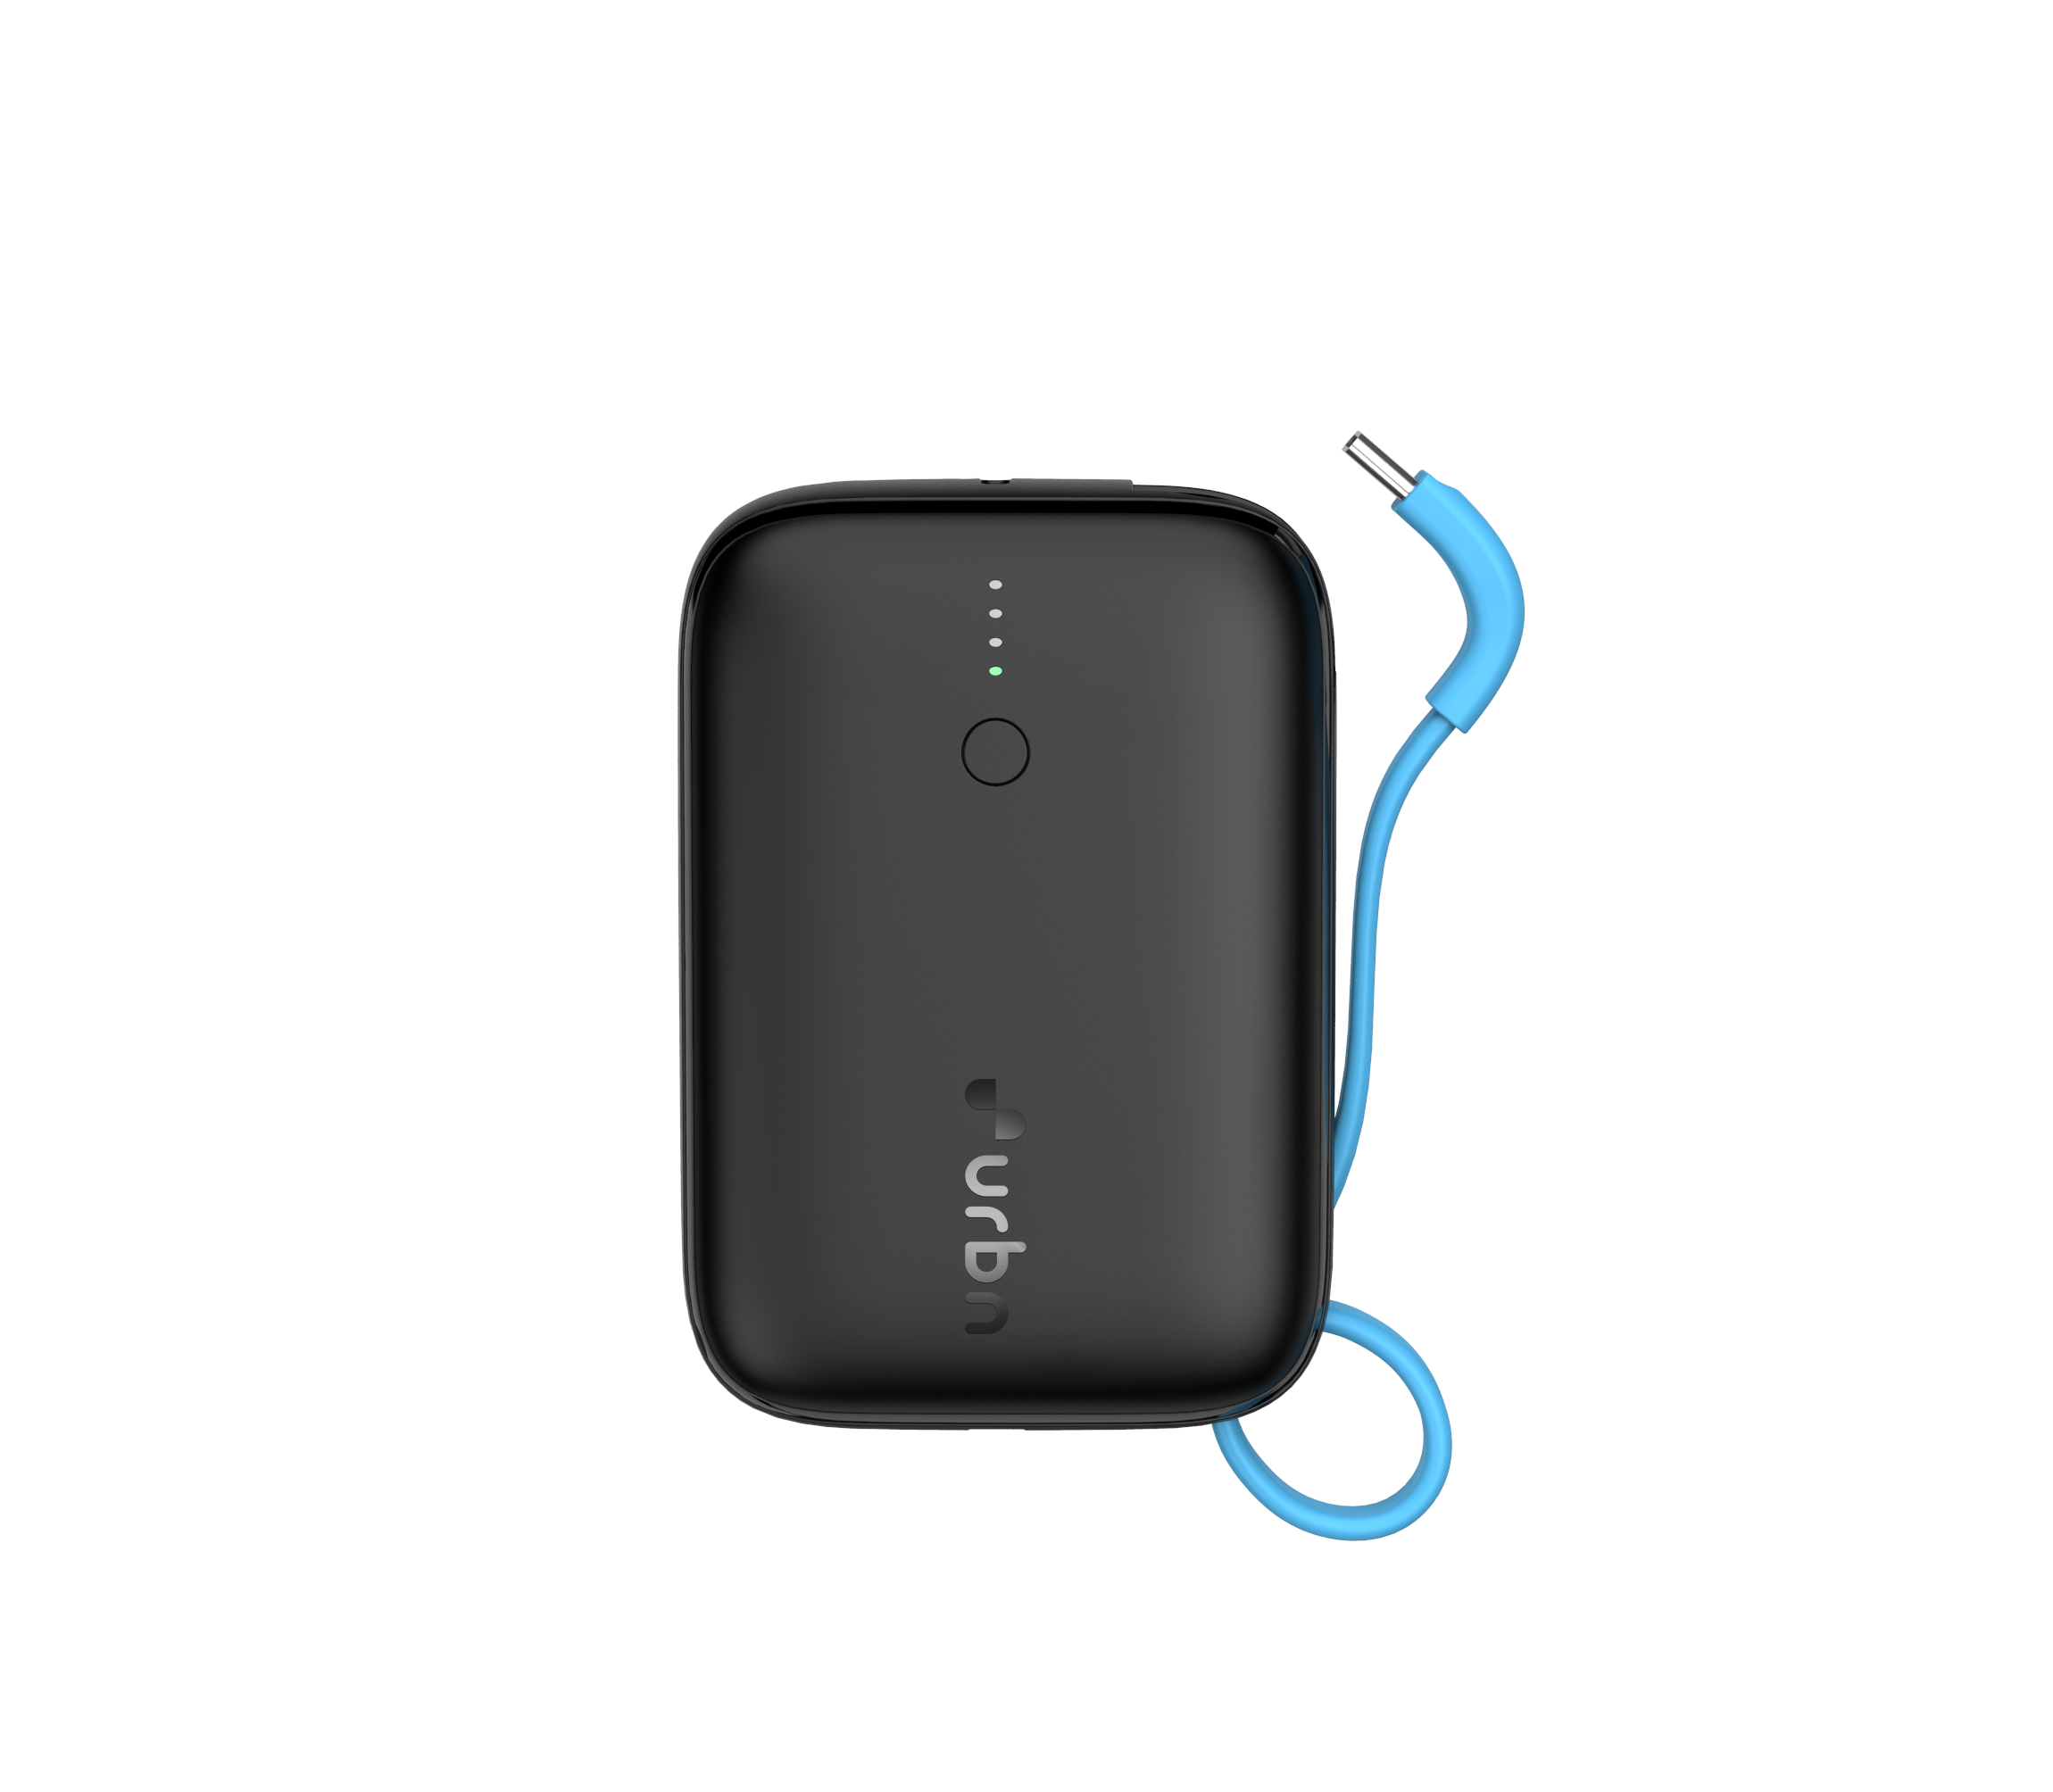 Urbn launches Nanolink Power Bank with Built-In Type-C Cable